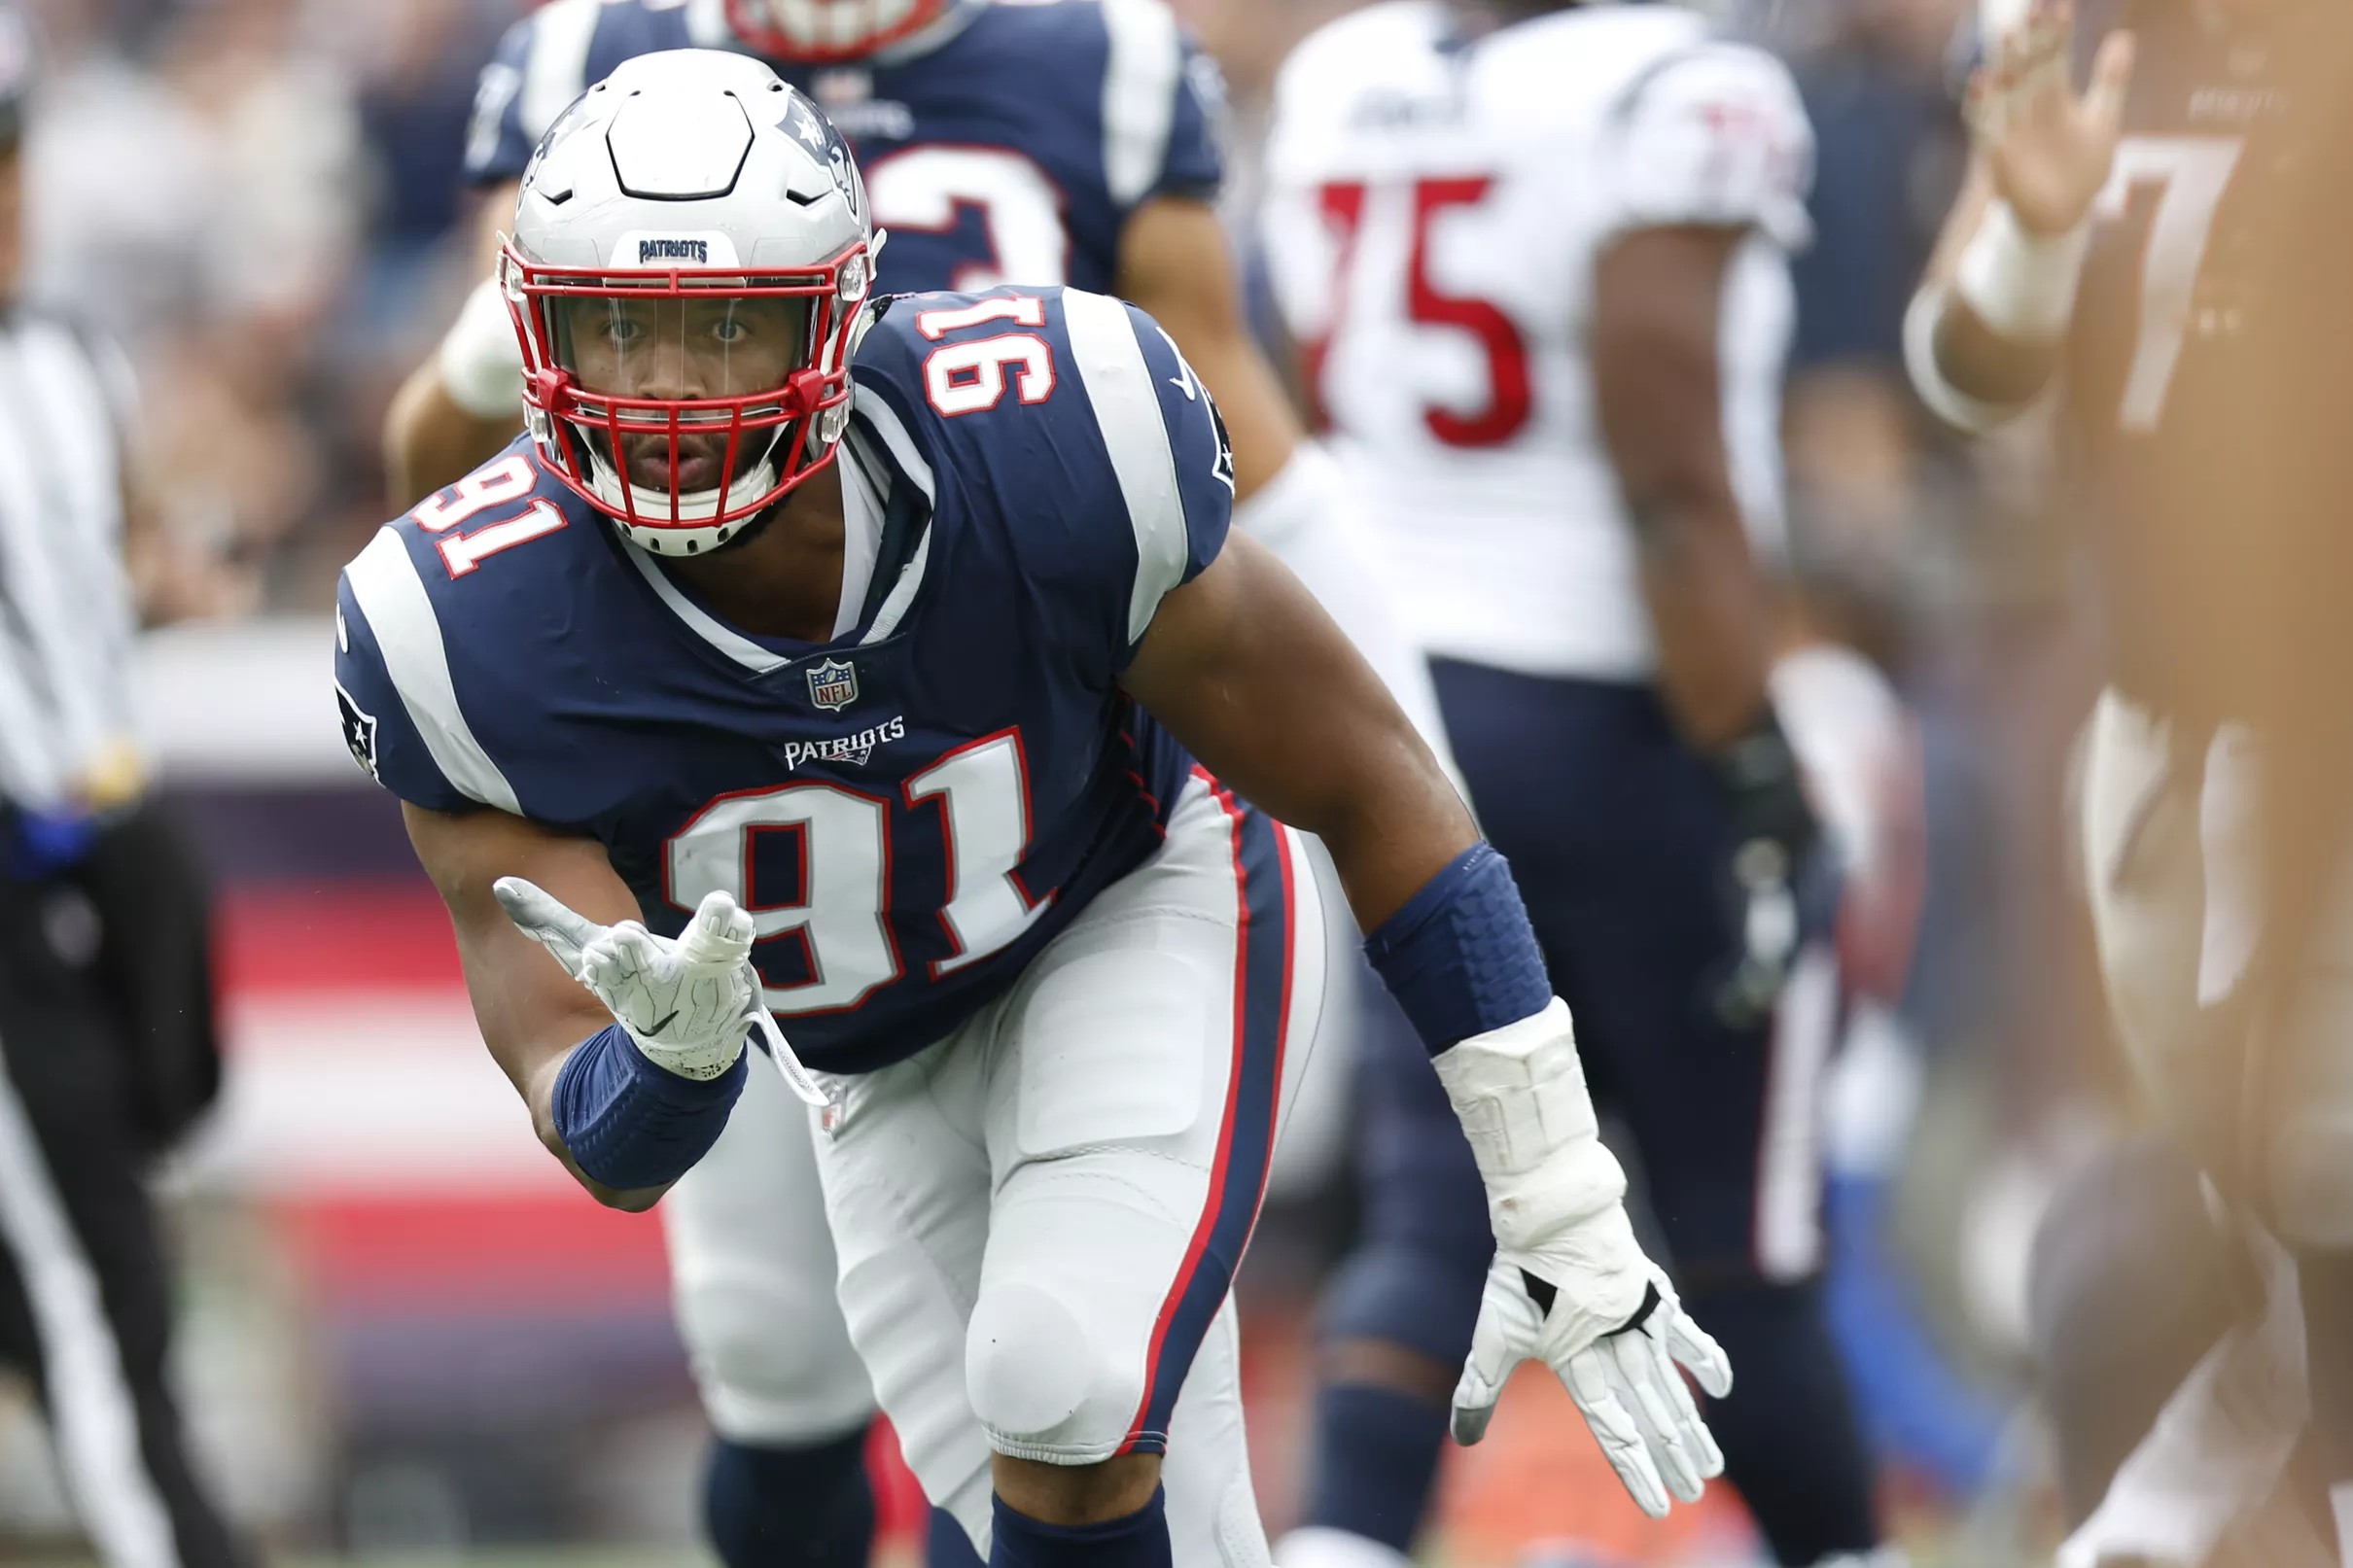 The Patriots pass rush appears to be much improved